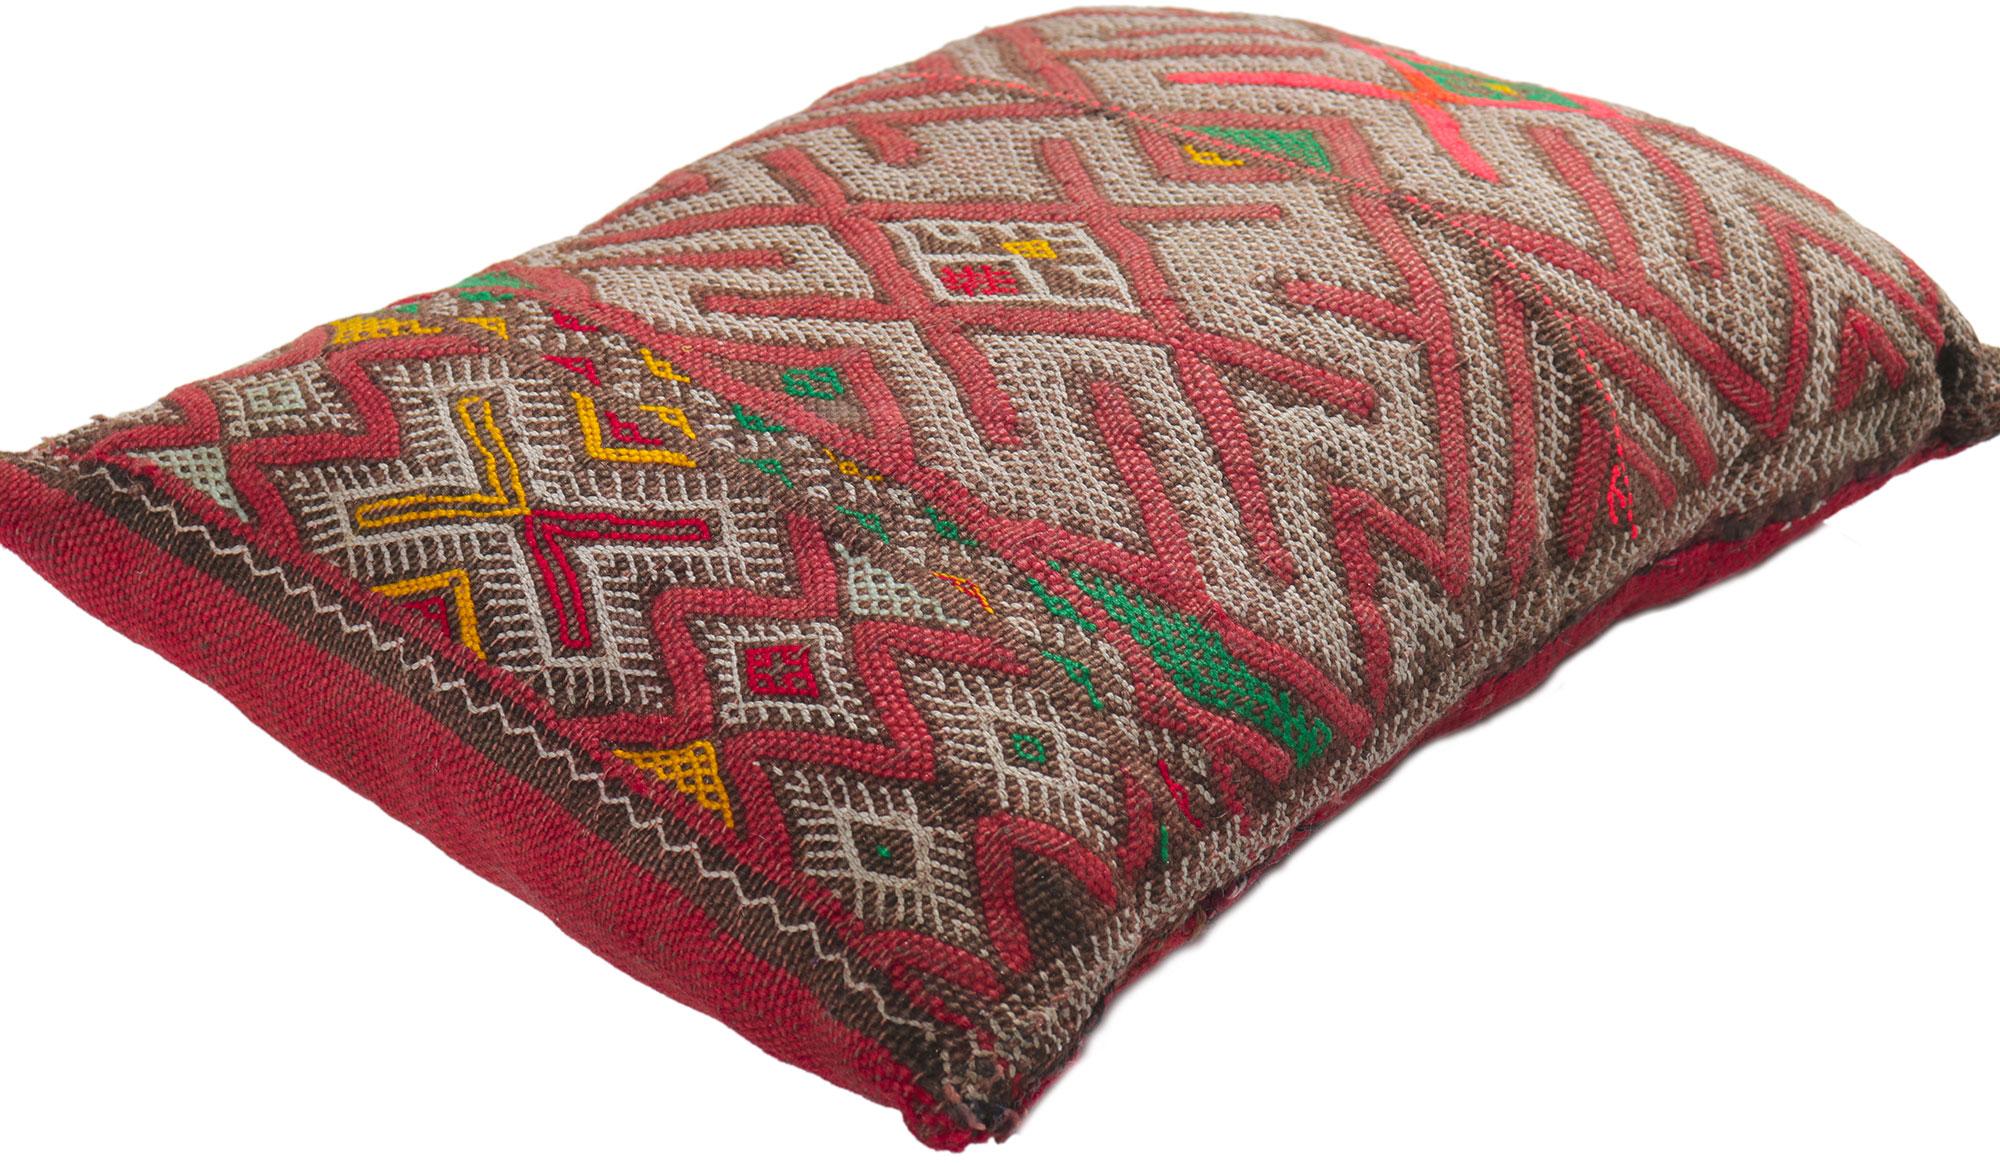 78446 Vintage Zemmour Moroccan Rug Pillow, 01'00 x 01'06 x 00'04.
Emanating nomadic charm with elements of comfort and functional versatility, this vintage Moroccan pillow conjures the spirit of Morocco. Made by talented artisans of the Zemmour